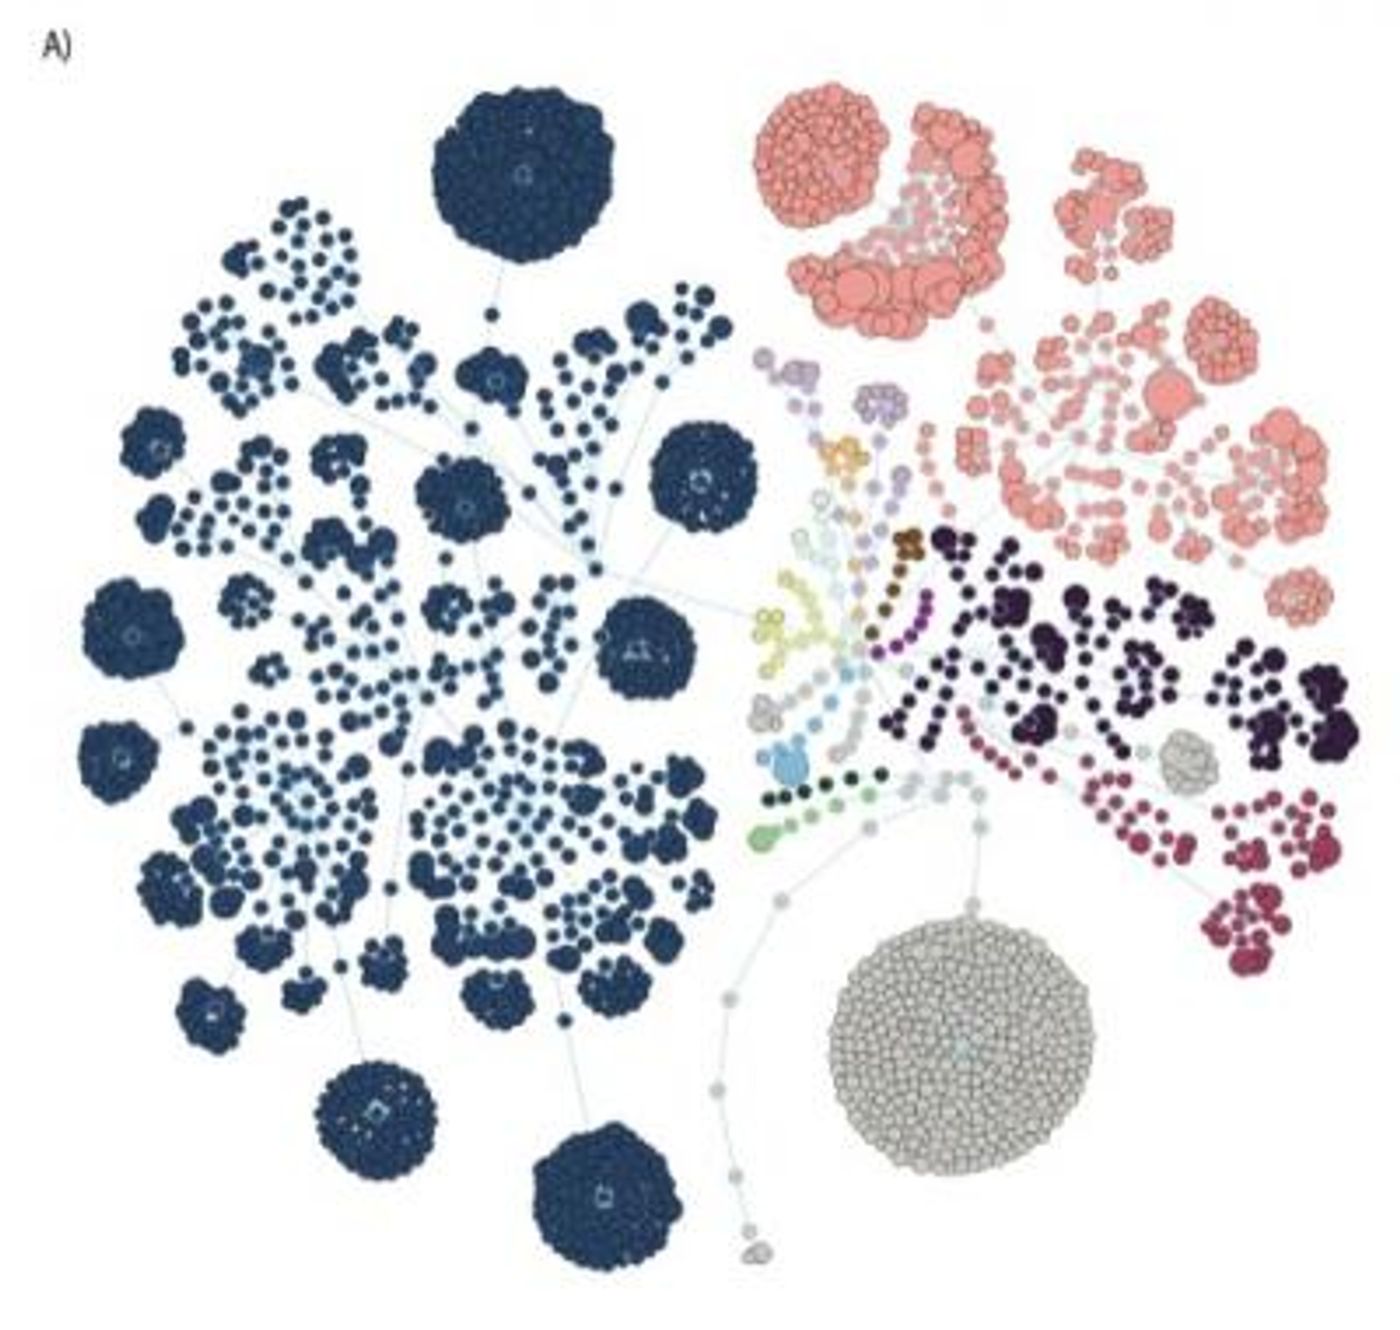 Human gut microbiome composition shows an enormous richness. Each circle represents a bacterial species, while the different colours mark different bacterial phyla. / Credit:  Dr. Amir Minerbi